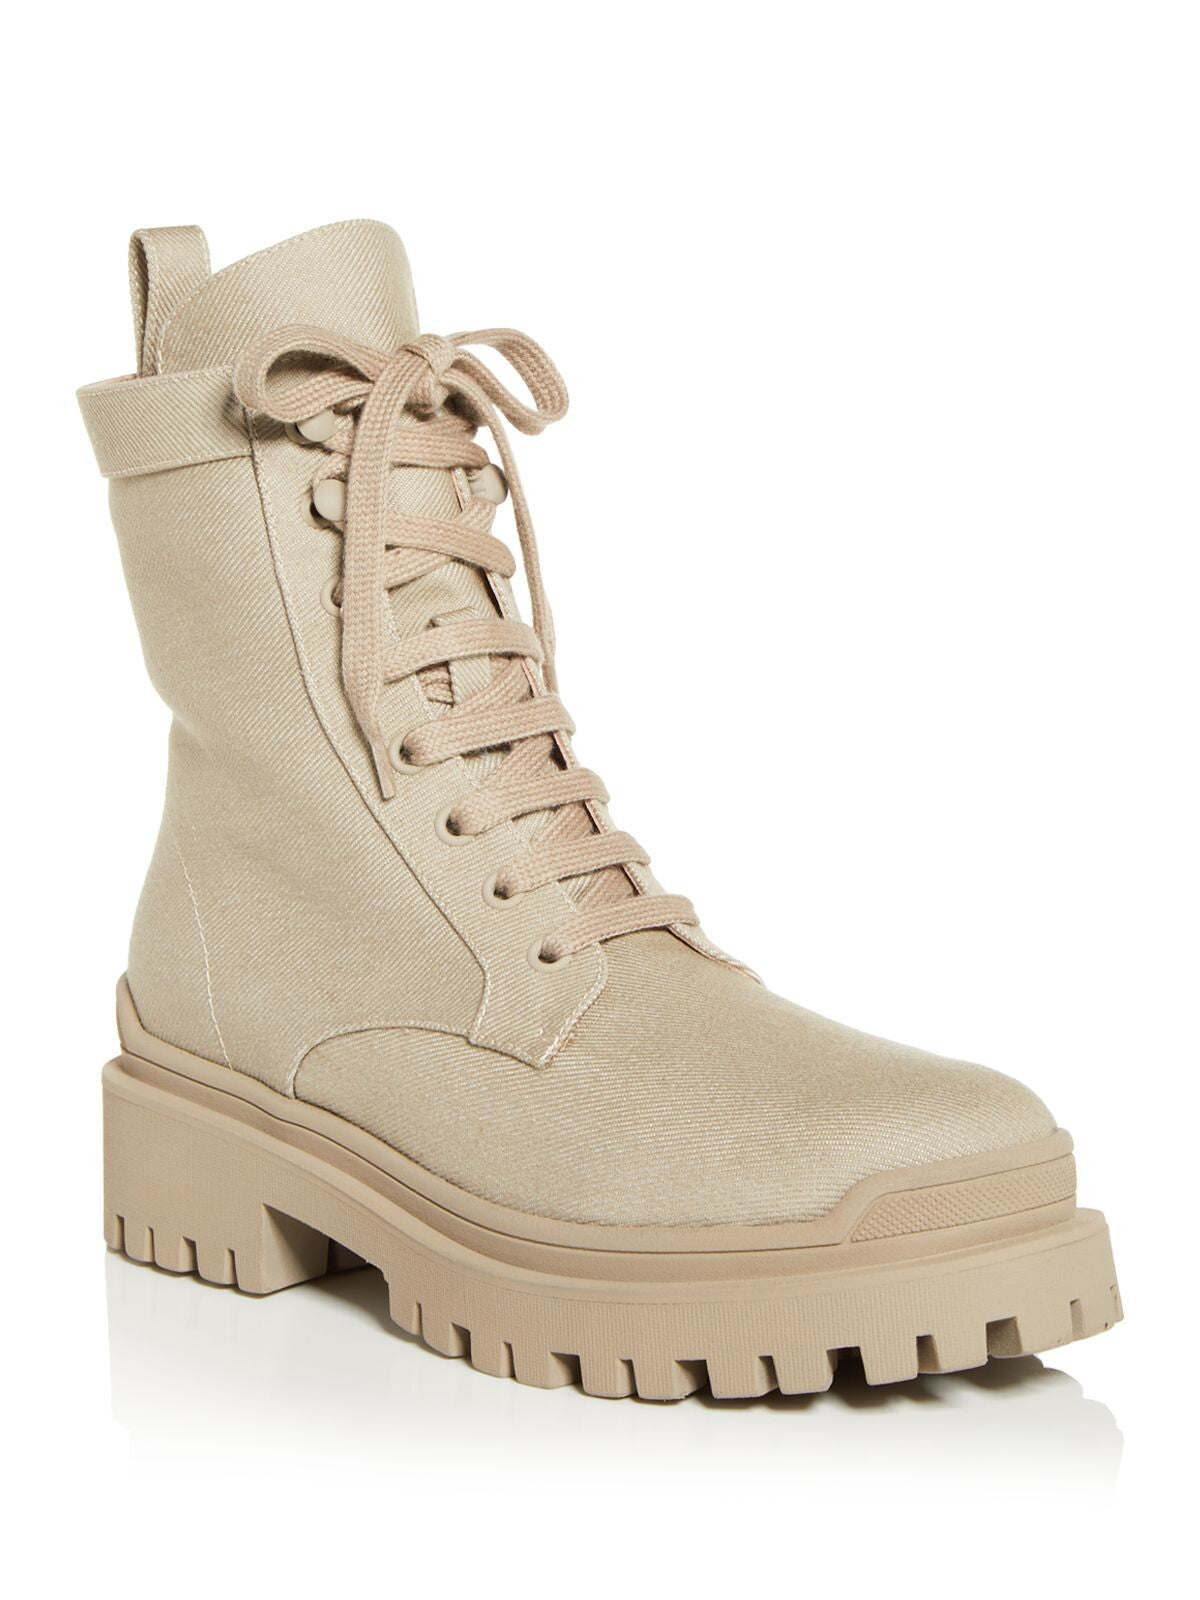 ILIO SMERALDO Womens Beige Pull Tab Cushioned Eyelet Sulcer Round Toe Block Heel Lace-Up Combat Boots 40